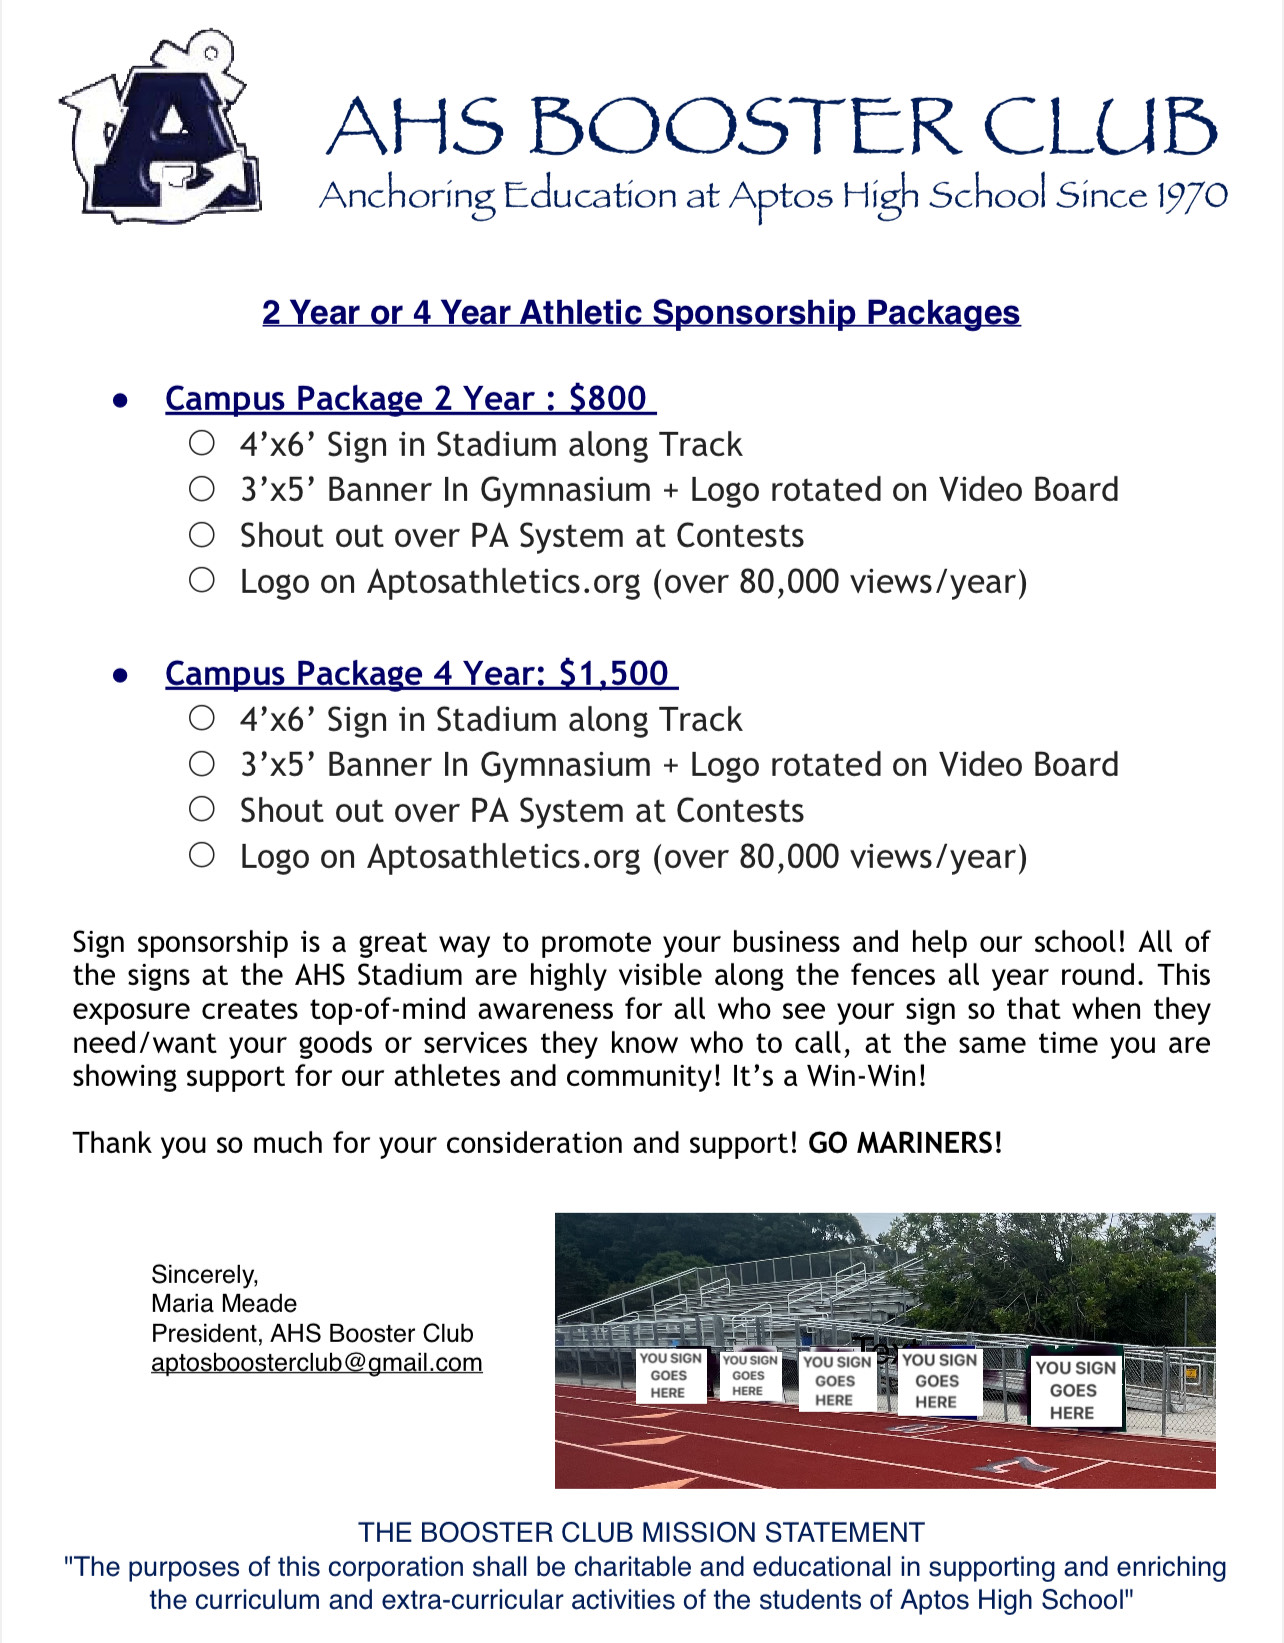 Athletic Sponsorship Packages